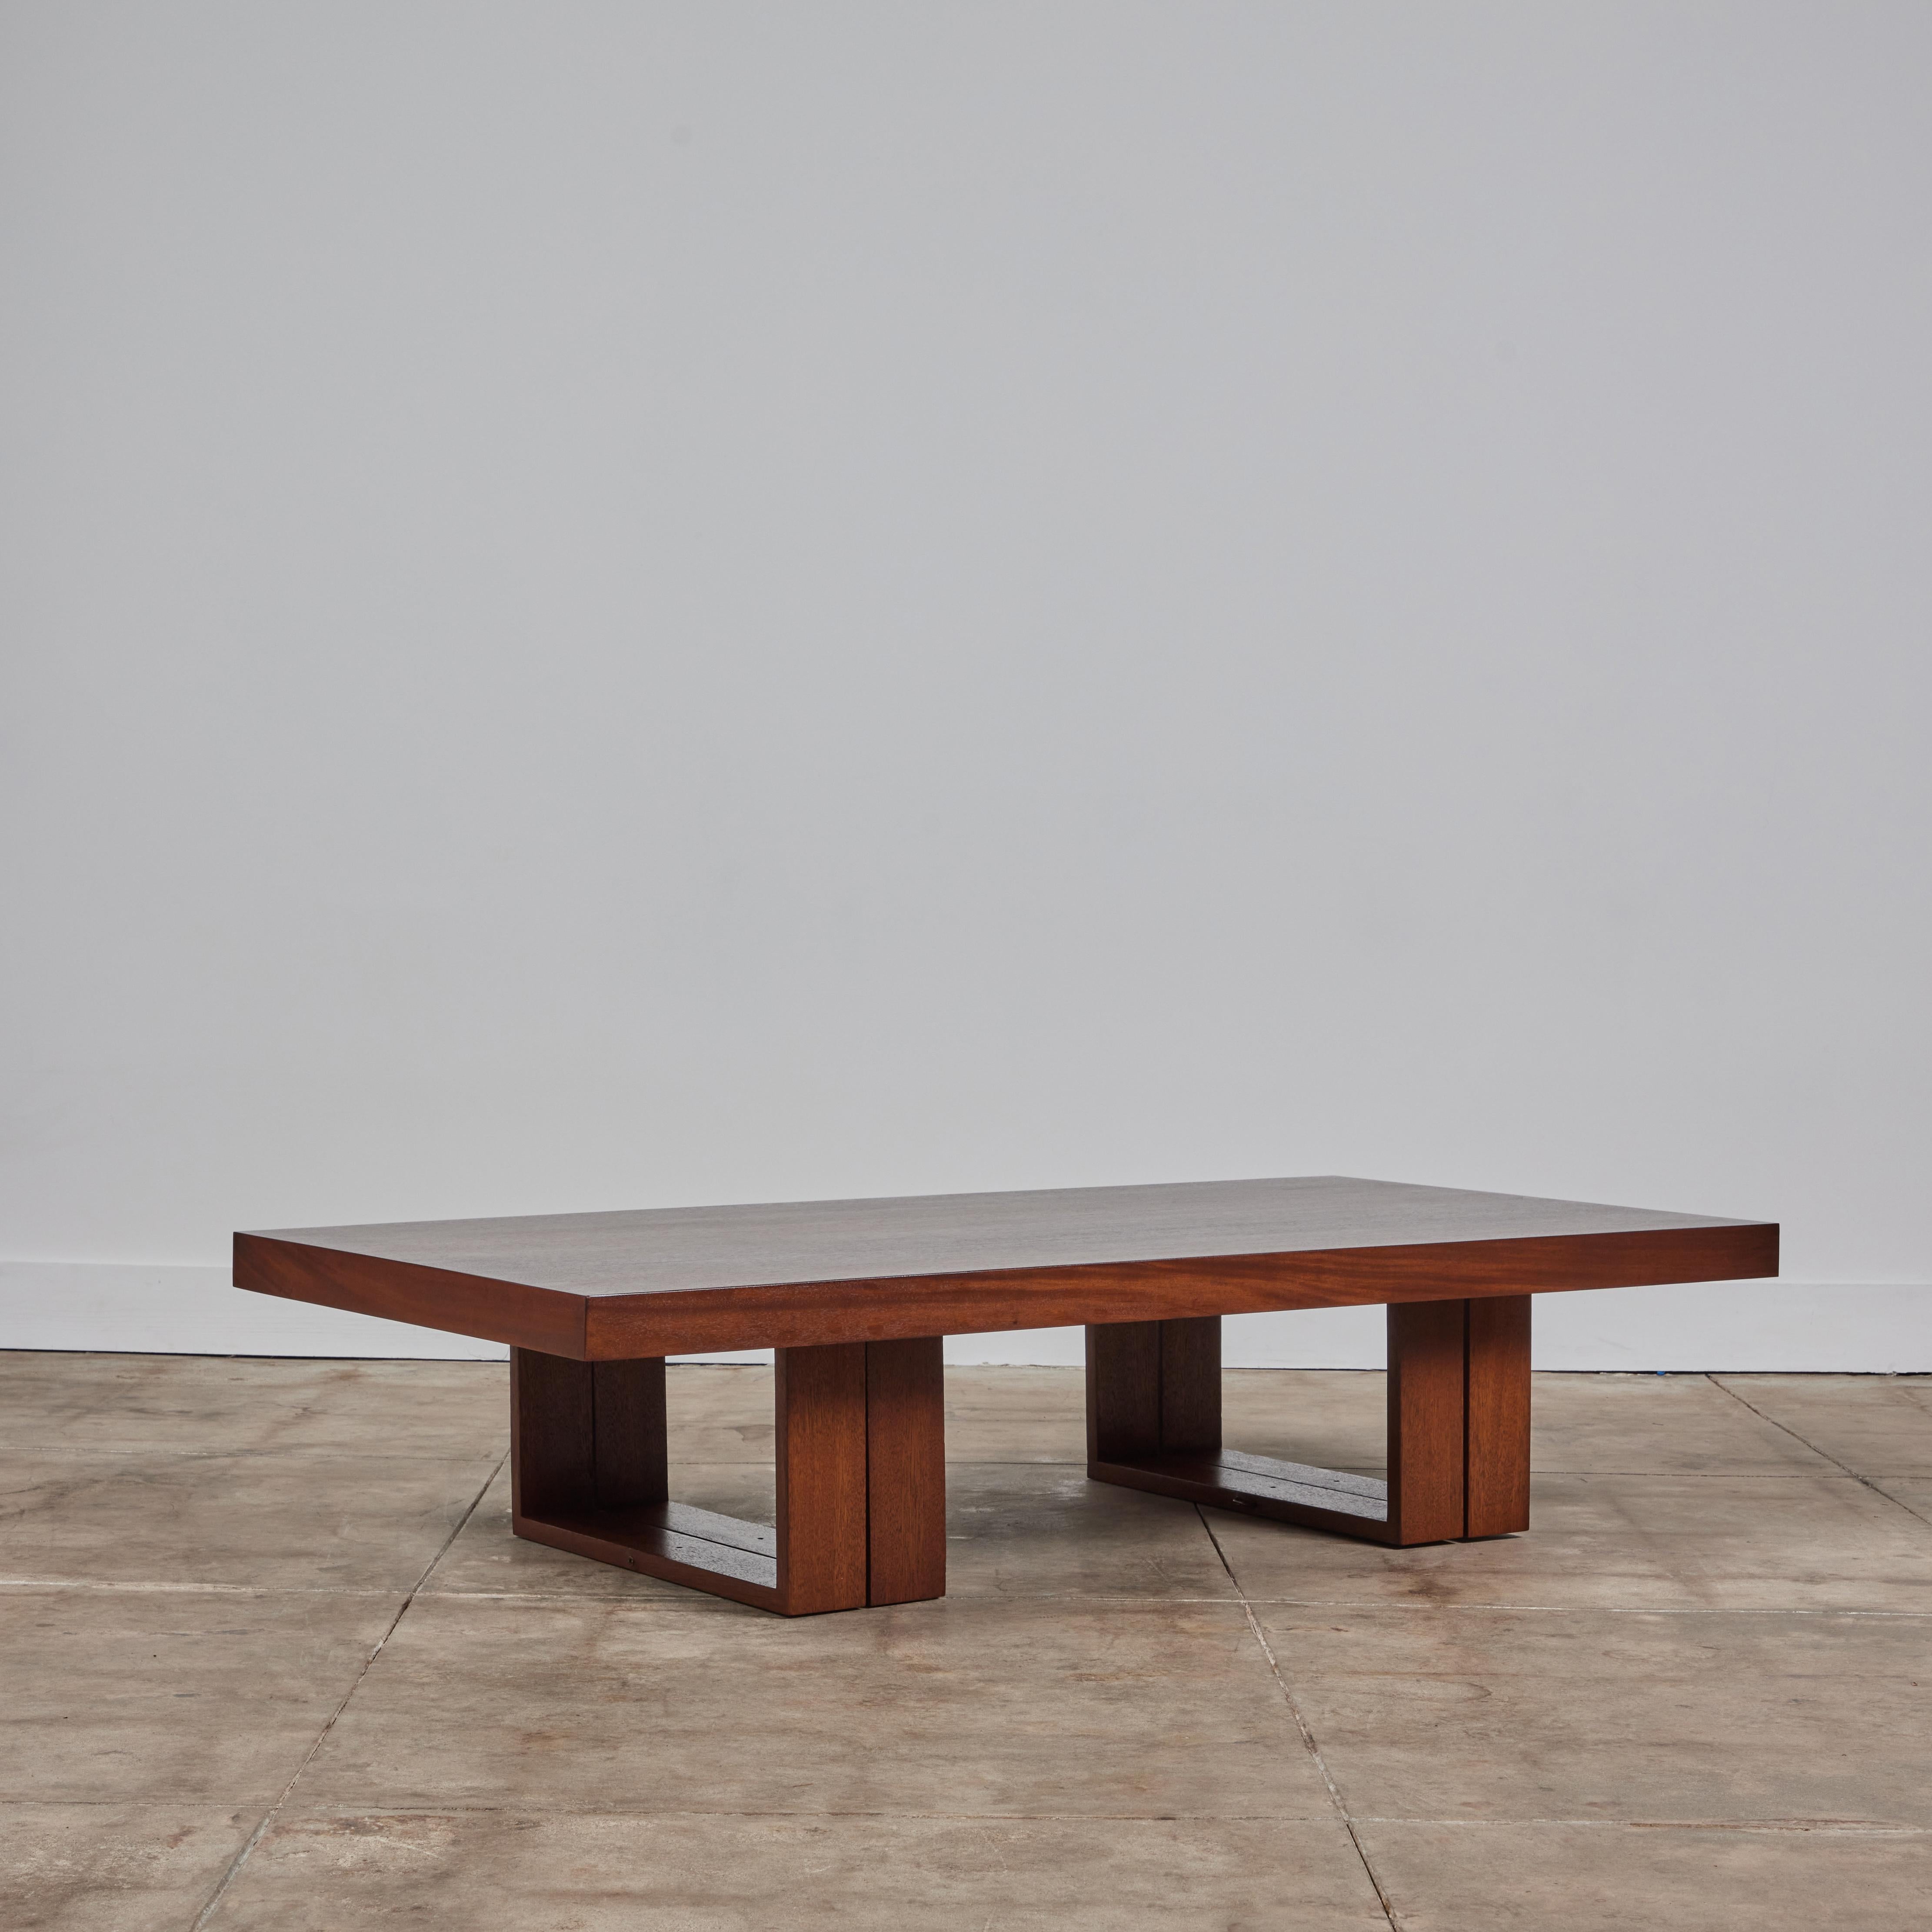 Coffee table by Hendrik Van Keppel and Taylor Green, also known as Van Keppel-Green or VKG for Brown Saltman, c.1960s, USA. The mahogany table features a large rectangular table top with the option to convert to a dining table with two double